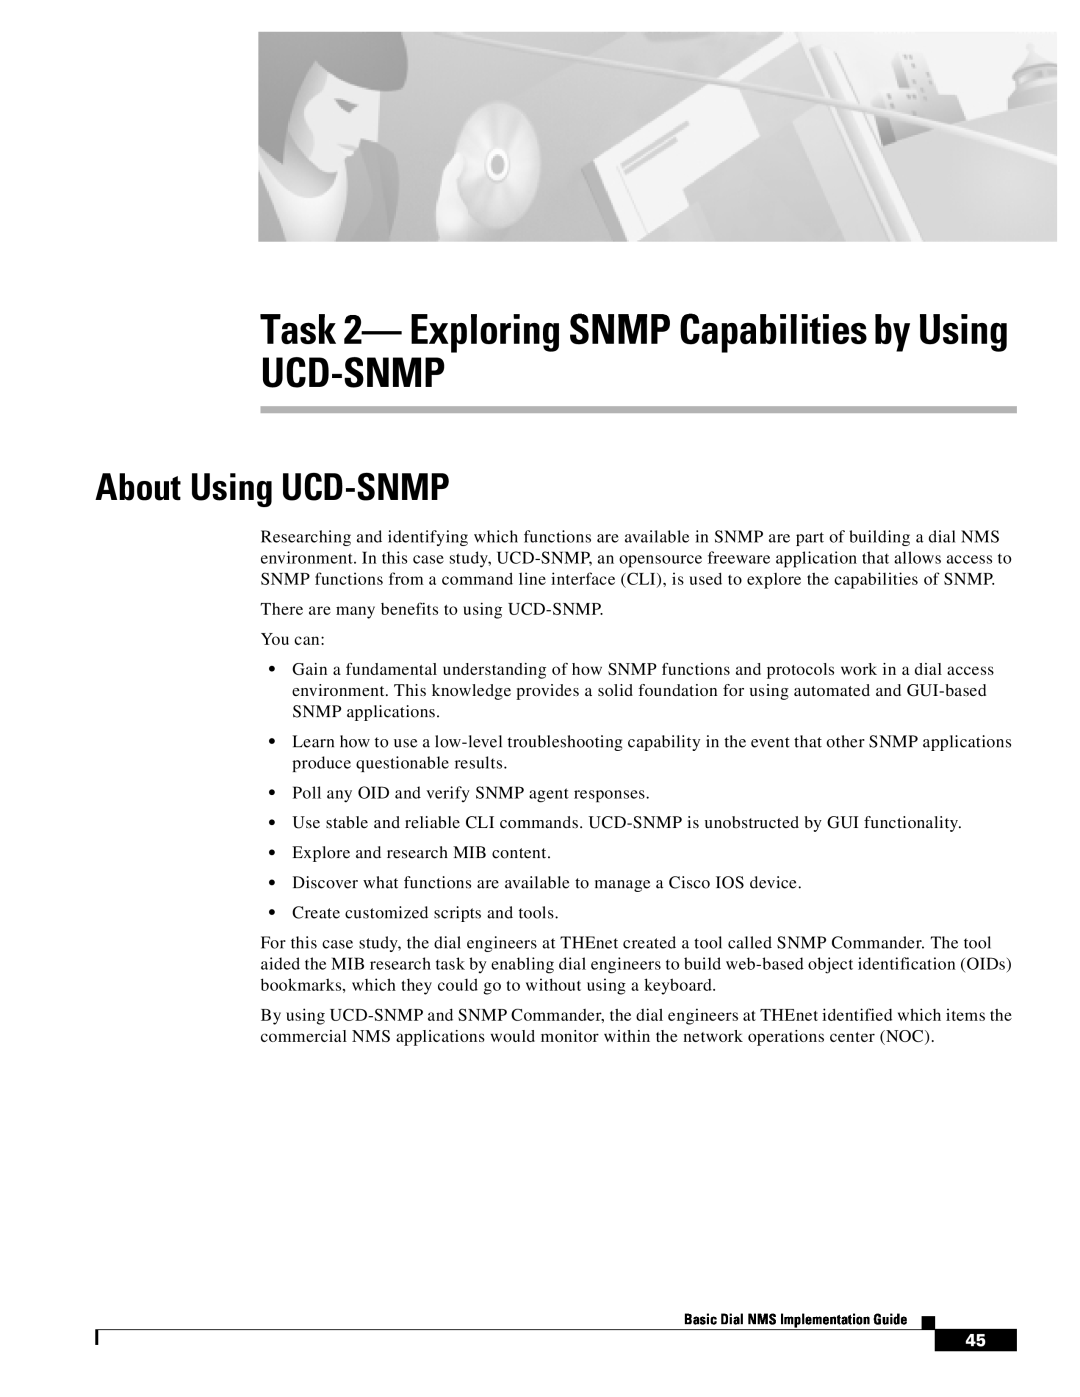 Cisco Systems Dial NMS manual Ucd-Snmp, Task 2- Exploring SNMP Capabilities by Using, About Using UCD-SNMP 